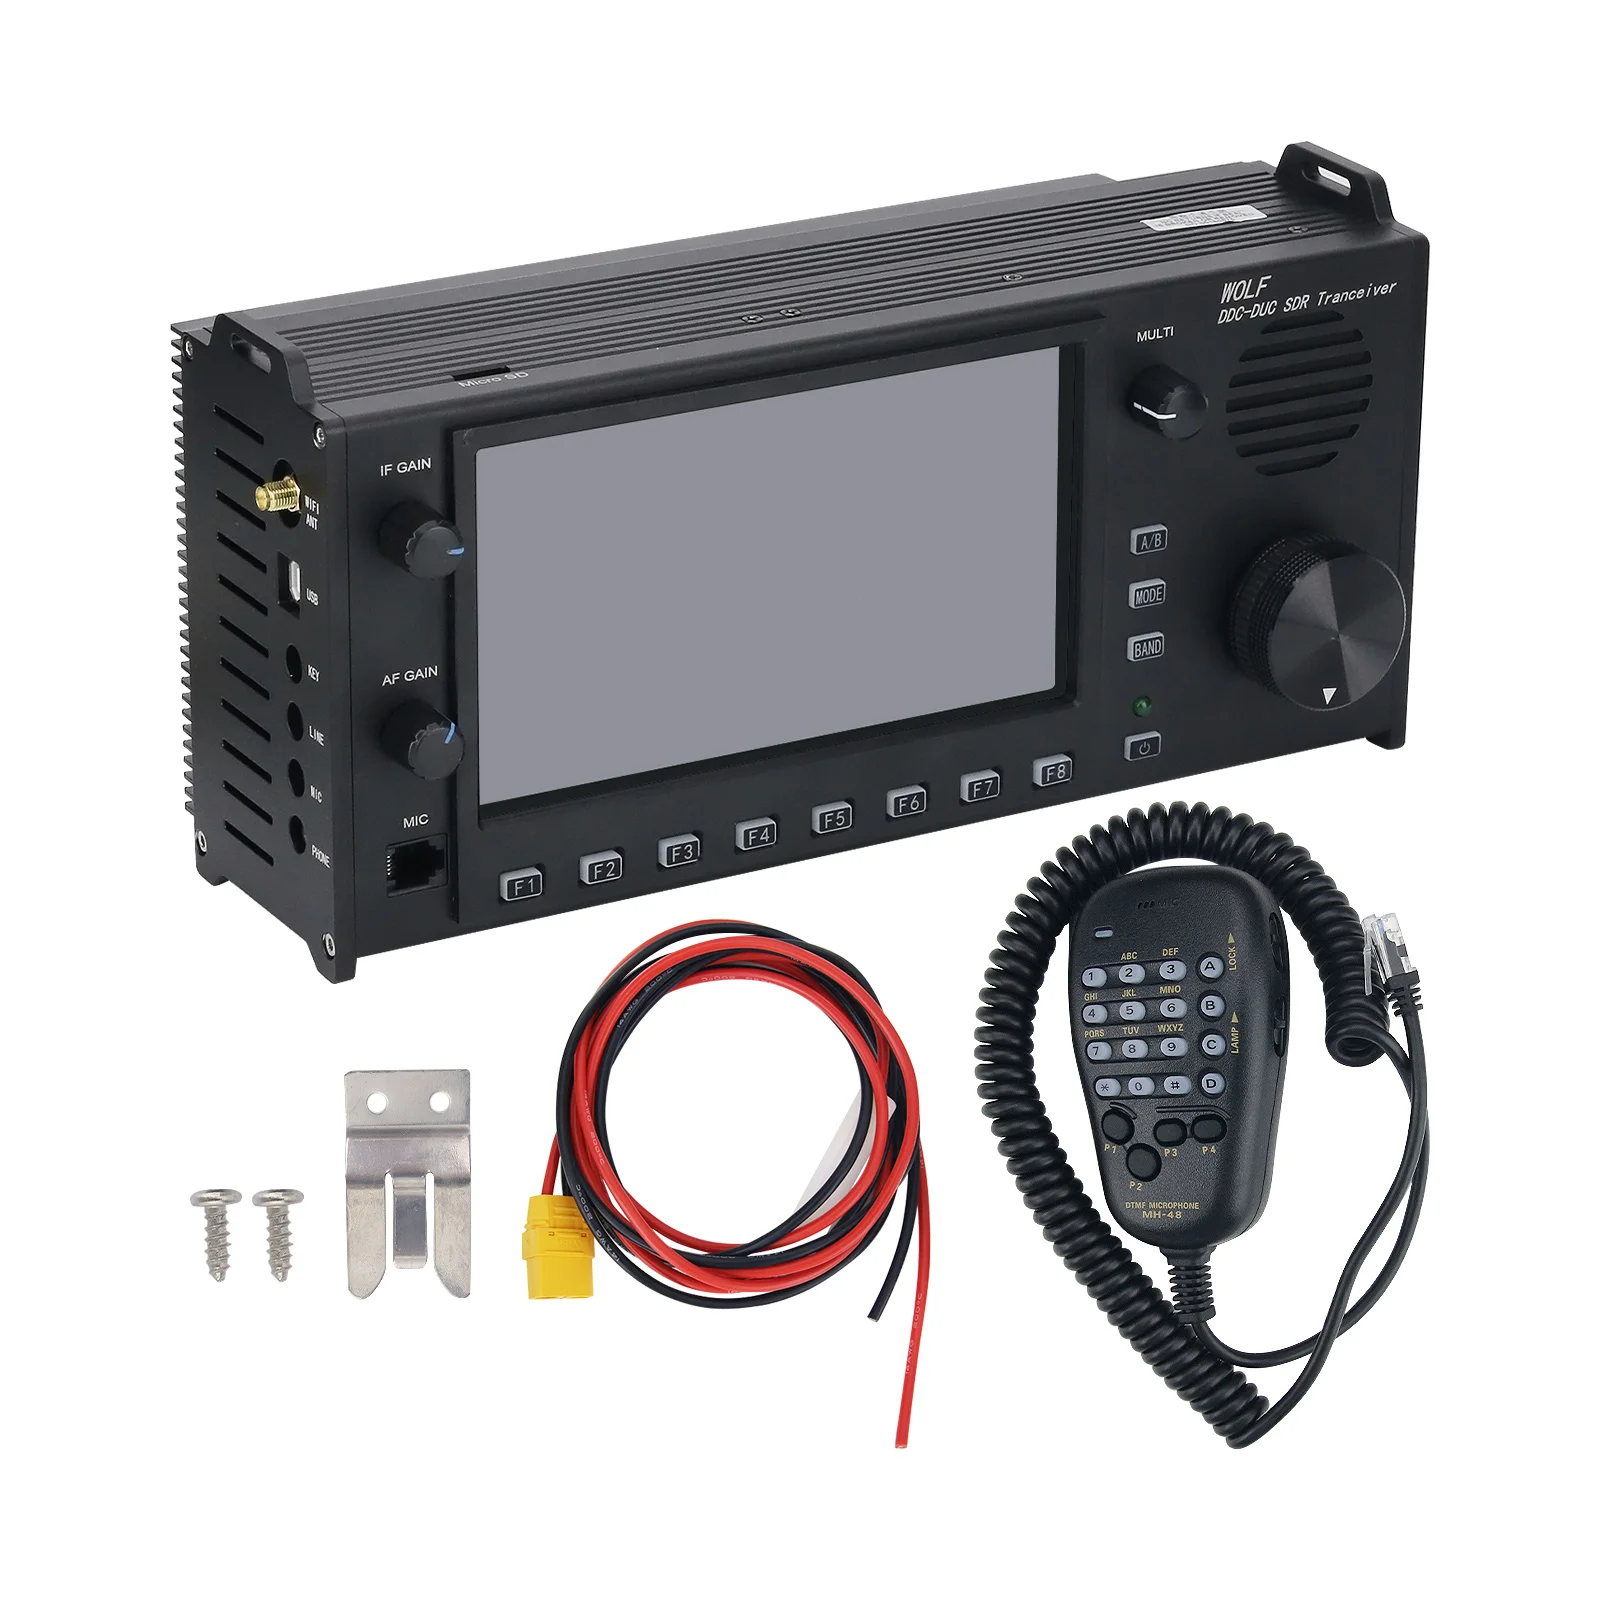 

HamGeek RS-998 100W HF+UV All Mode DDC/DUC Transceiver Mobile Radio SDR Transceiver with 7" Touch Screen